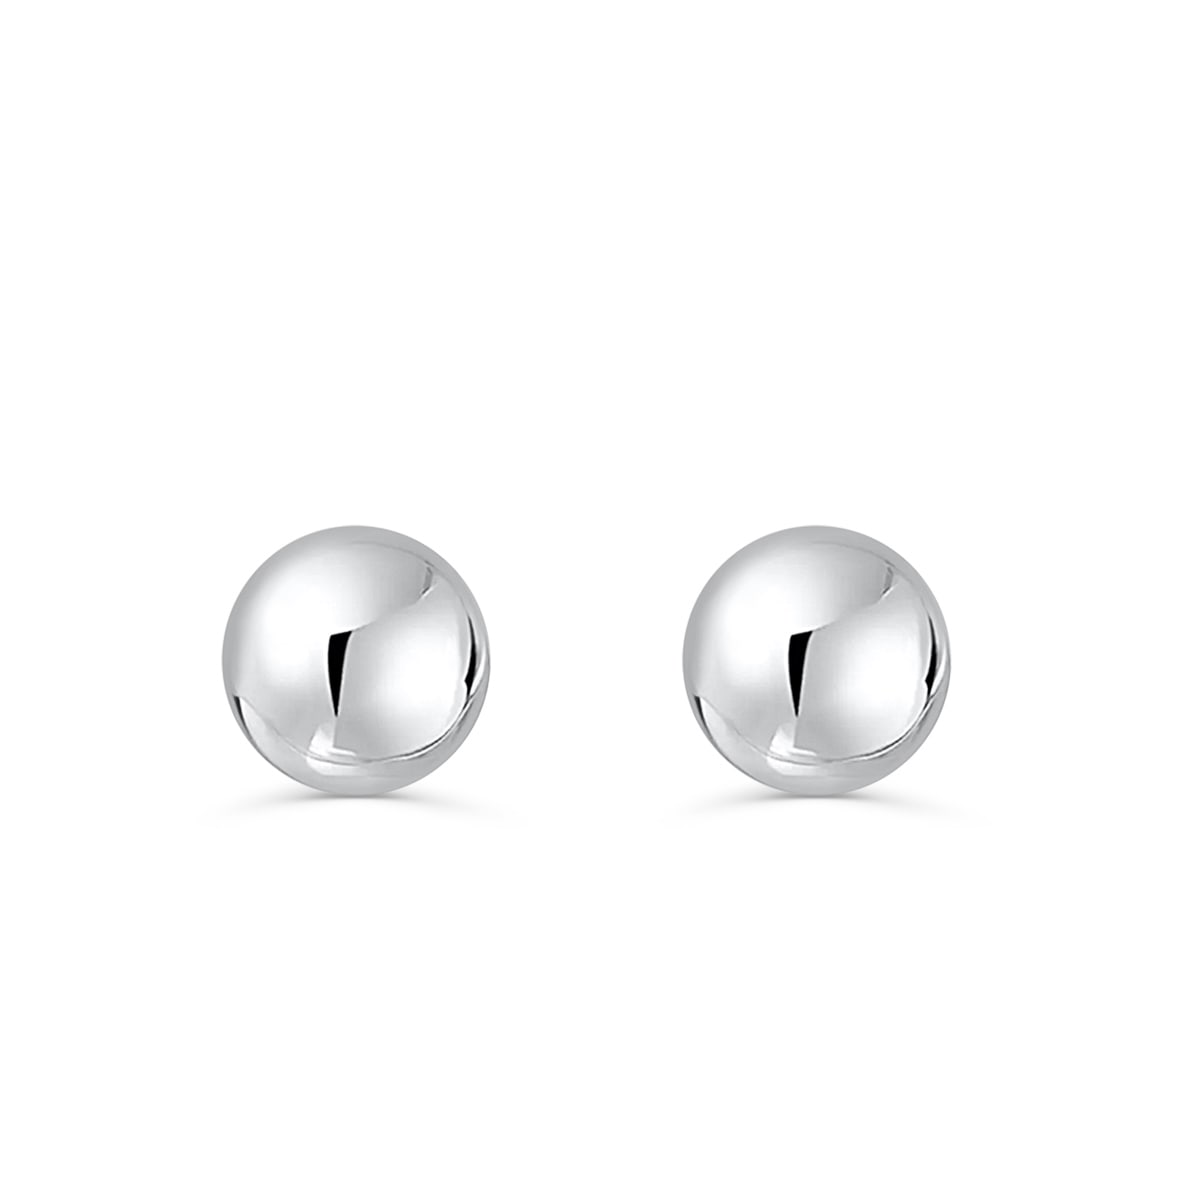 the leah silver ball earring studs